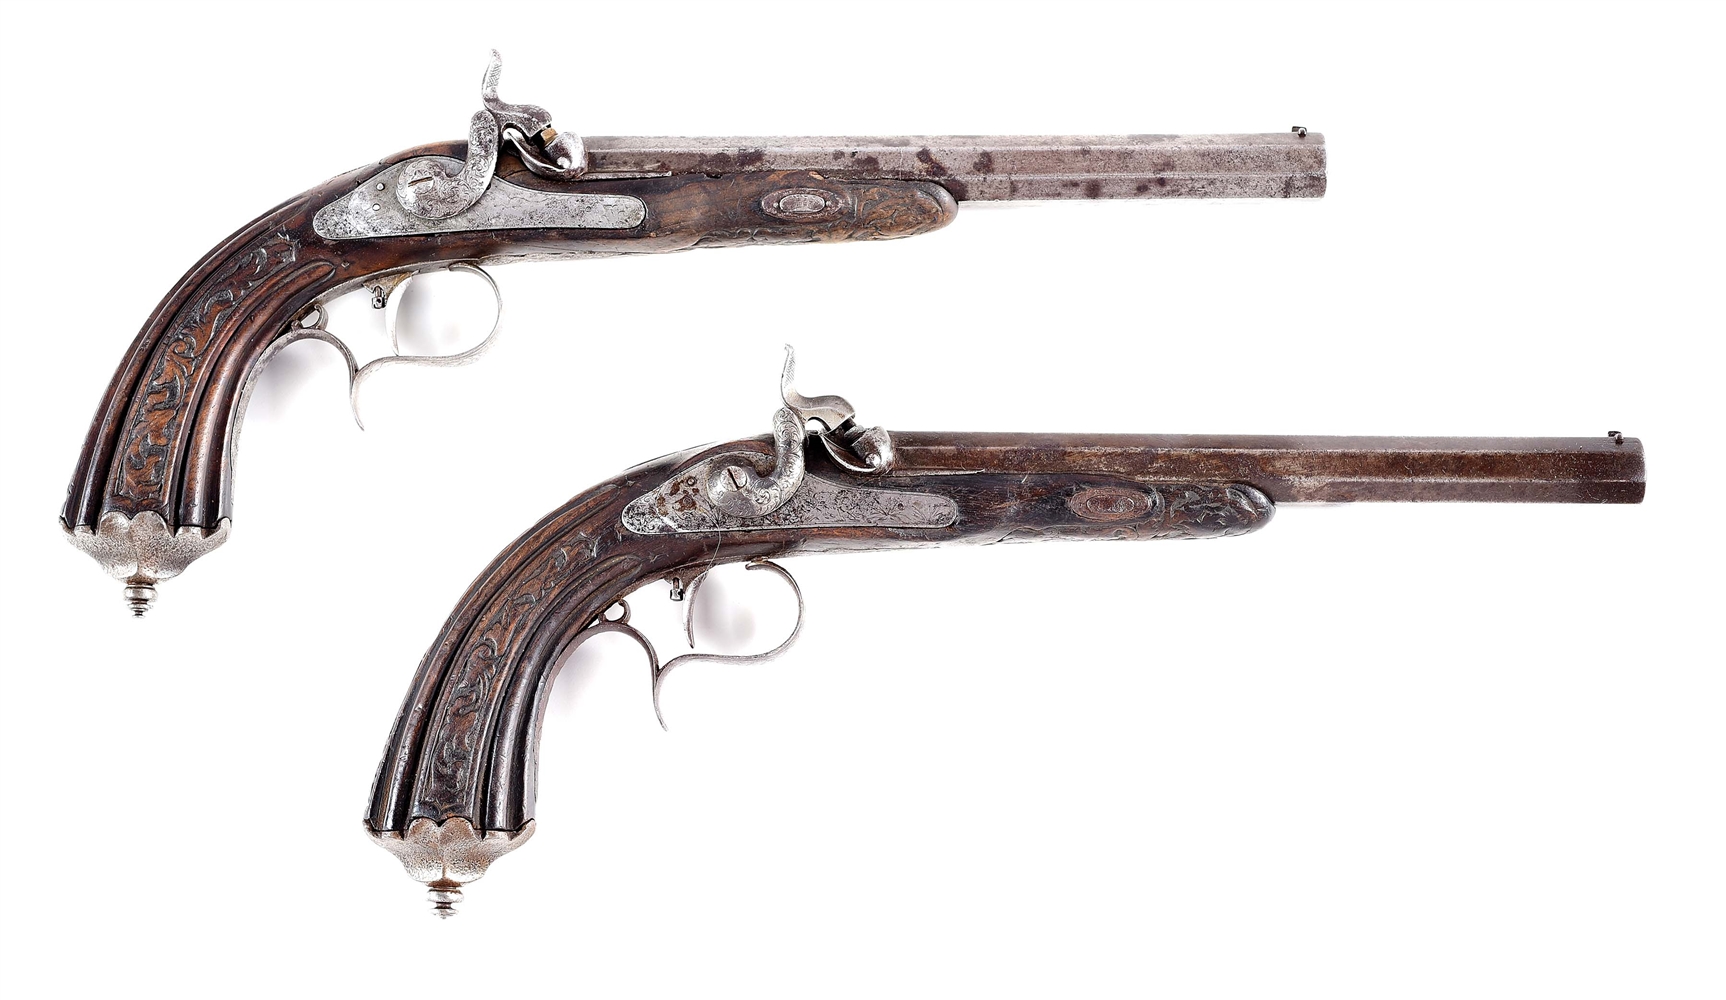 (A) PAIR OF SWISS PERCUSSION PISTOLS BY JAQUET.